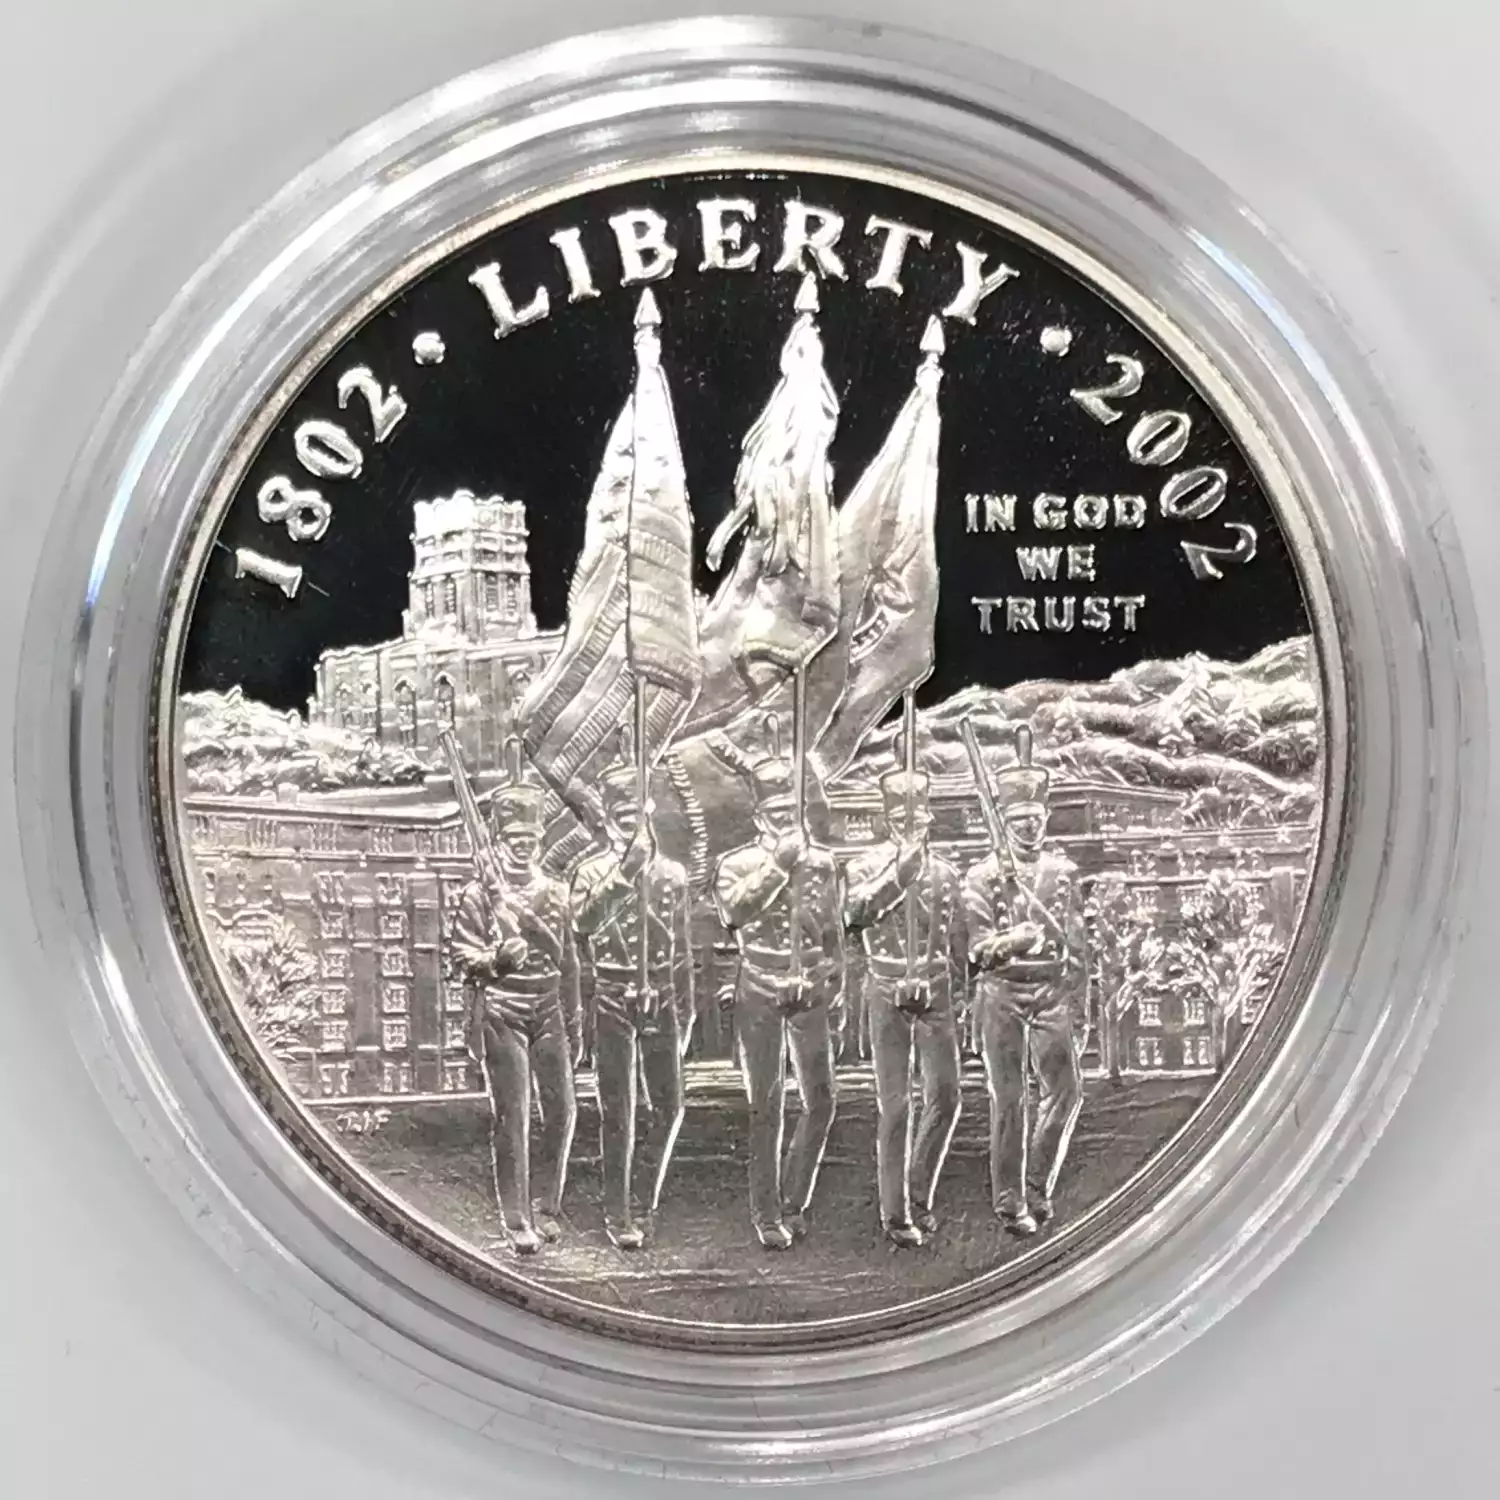 2002-W West Point Military Academy Proof Silver Dollar - Coin Only